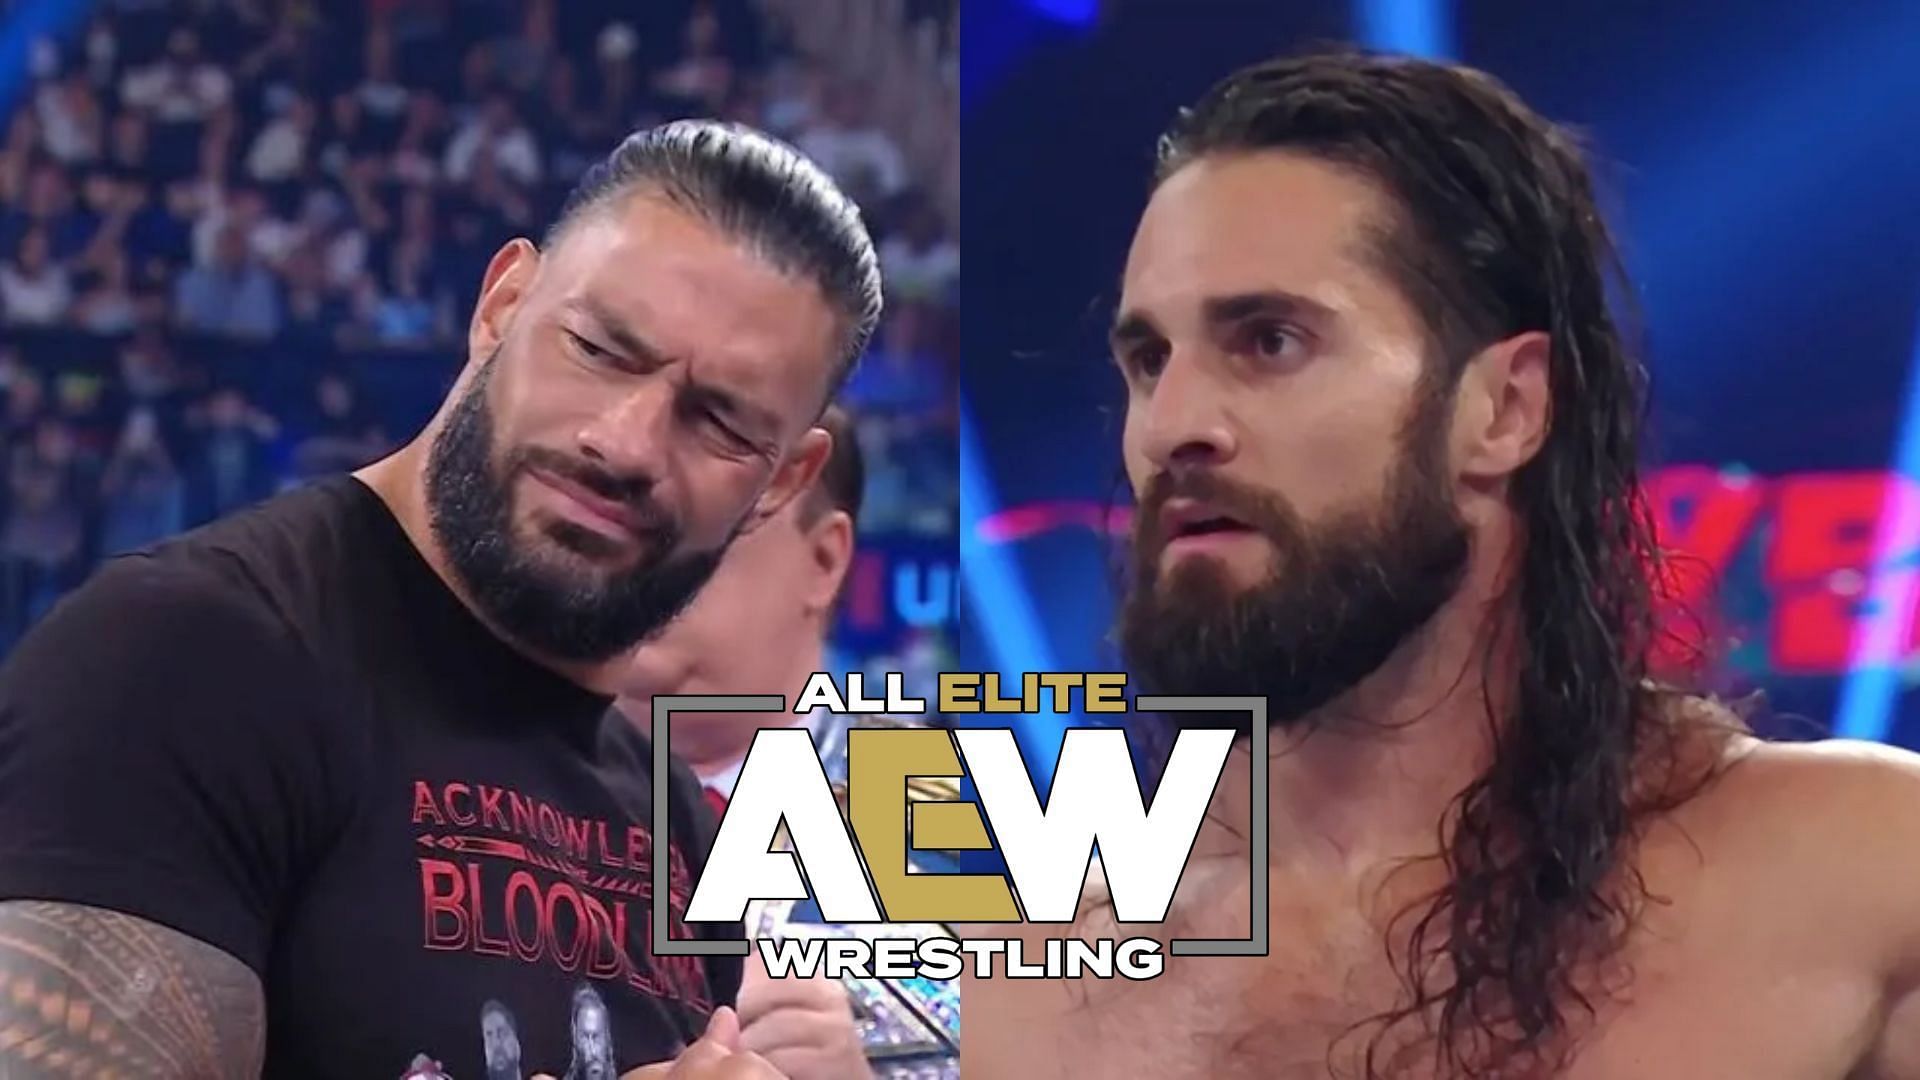 An AEW star might have bested Roman Reigns and Seth Rollins when it comes to character work.